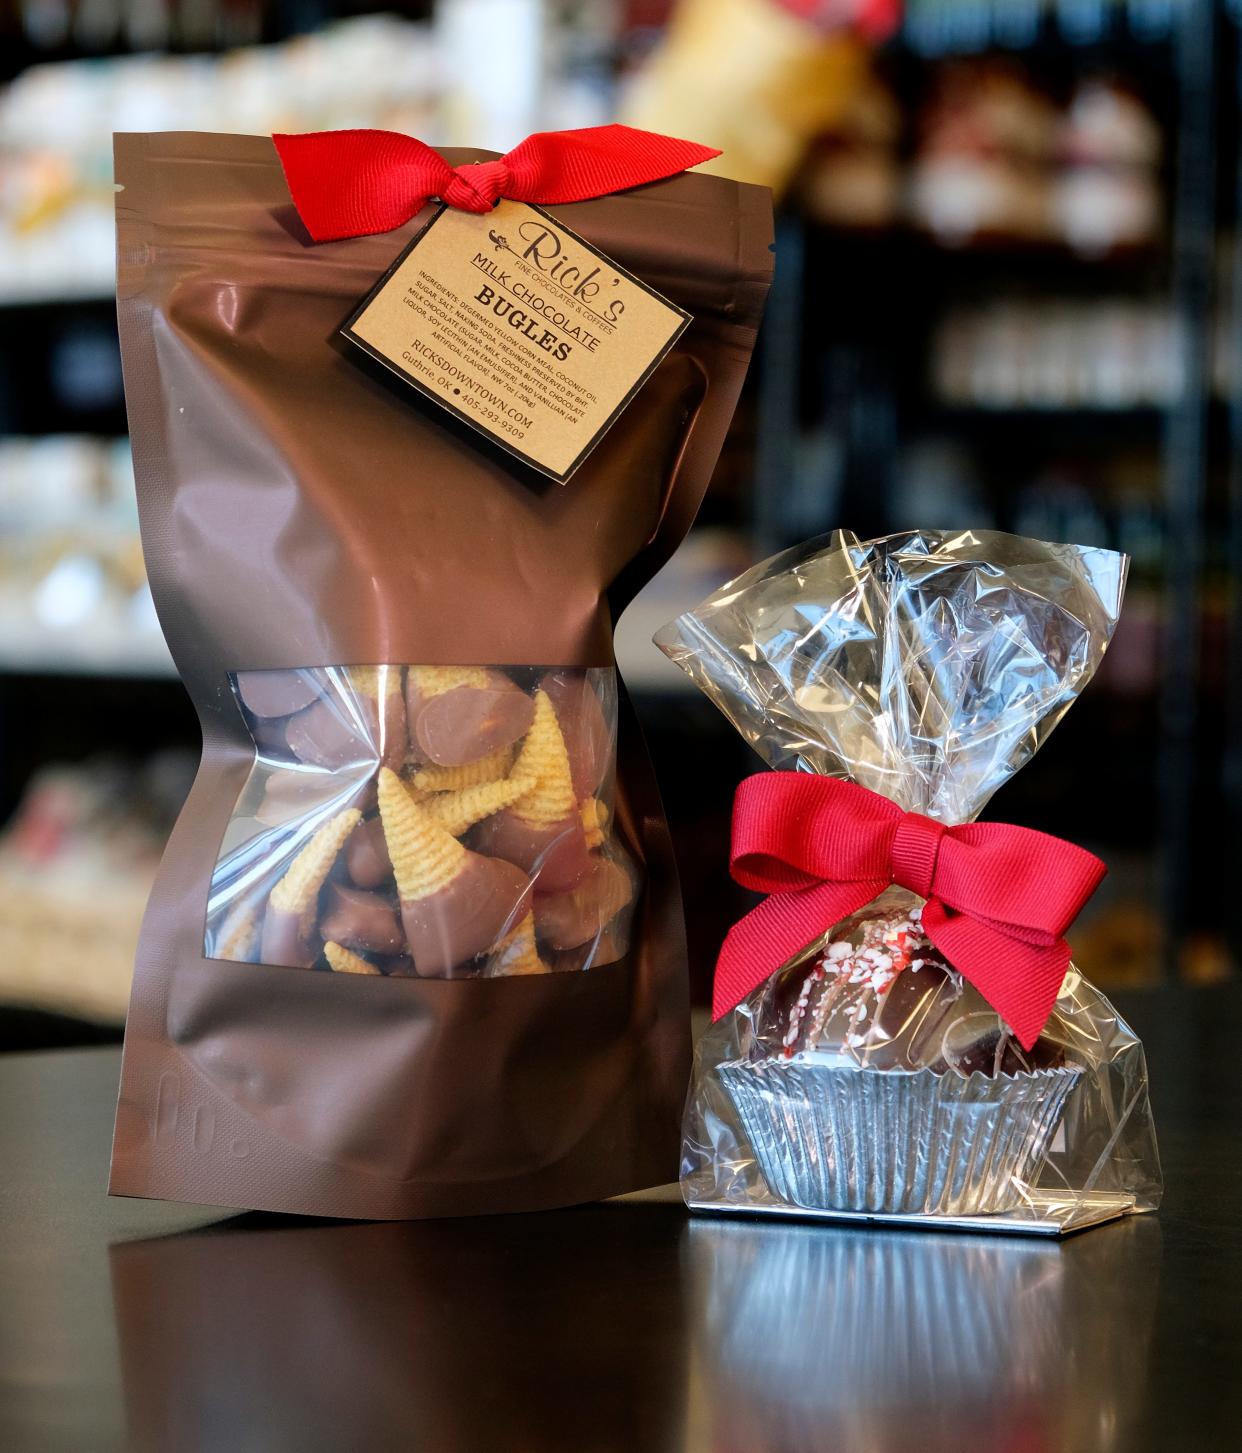 Custom curate a basket filled with gourmet food, drink and gift options from Edmond's Gourmet Gallery for holiday gifts.